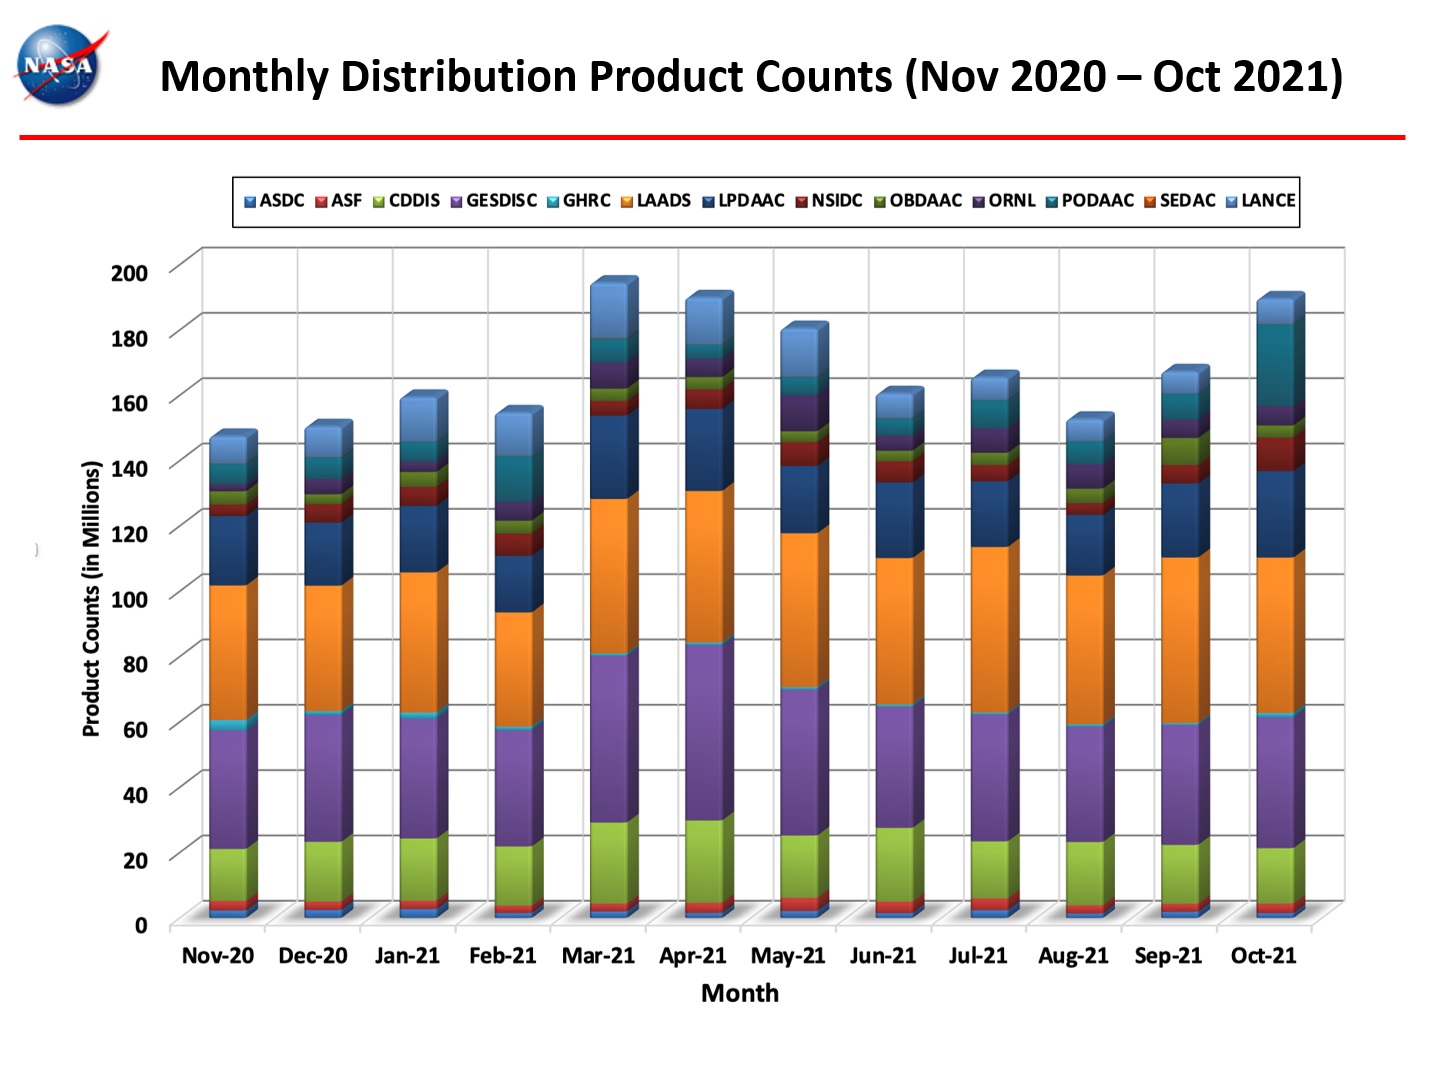 Monthly distribution product counts, Nov 2020-Oct 2021